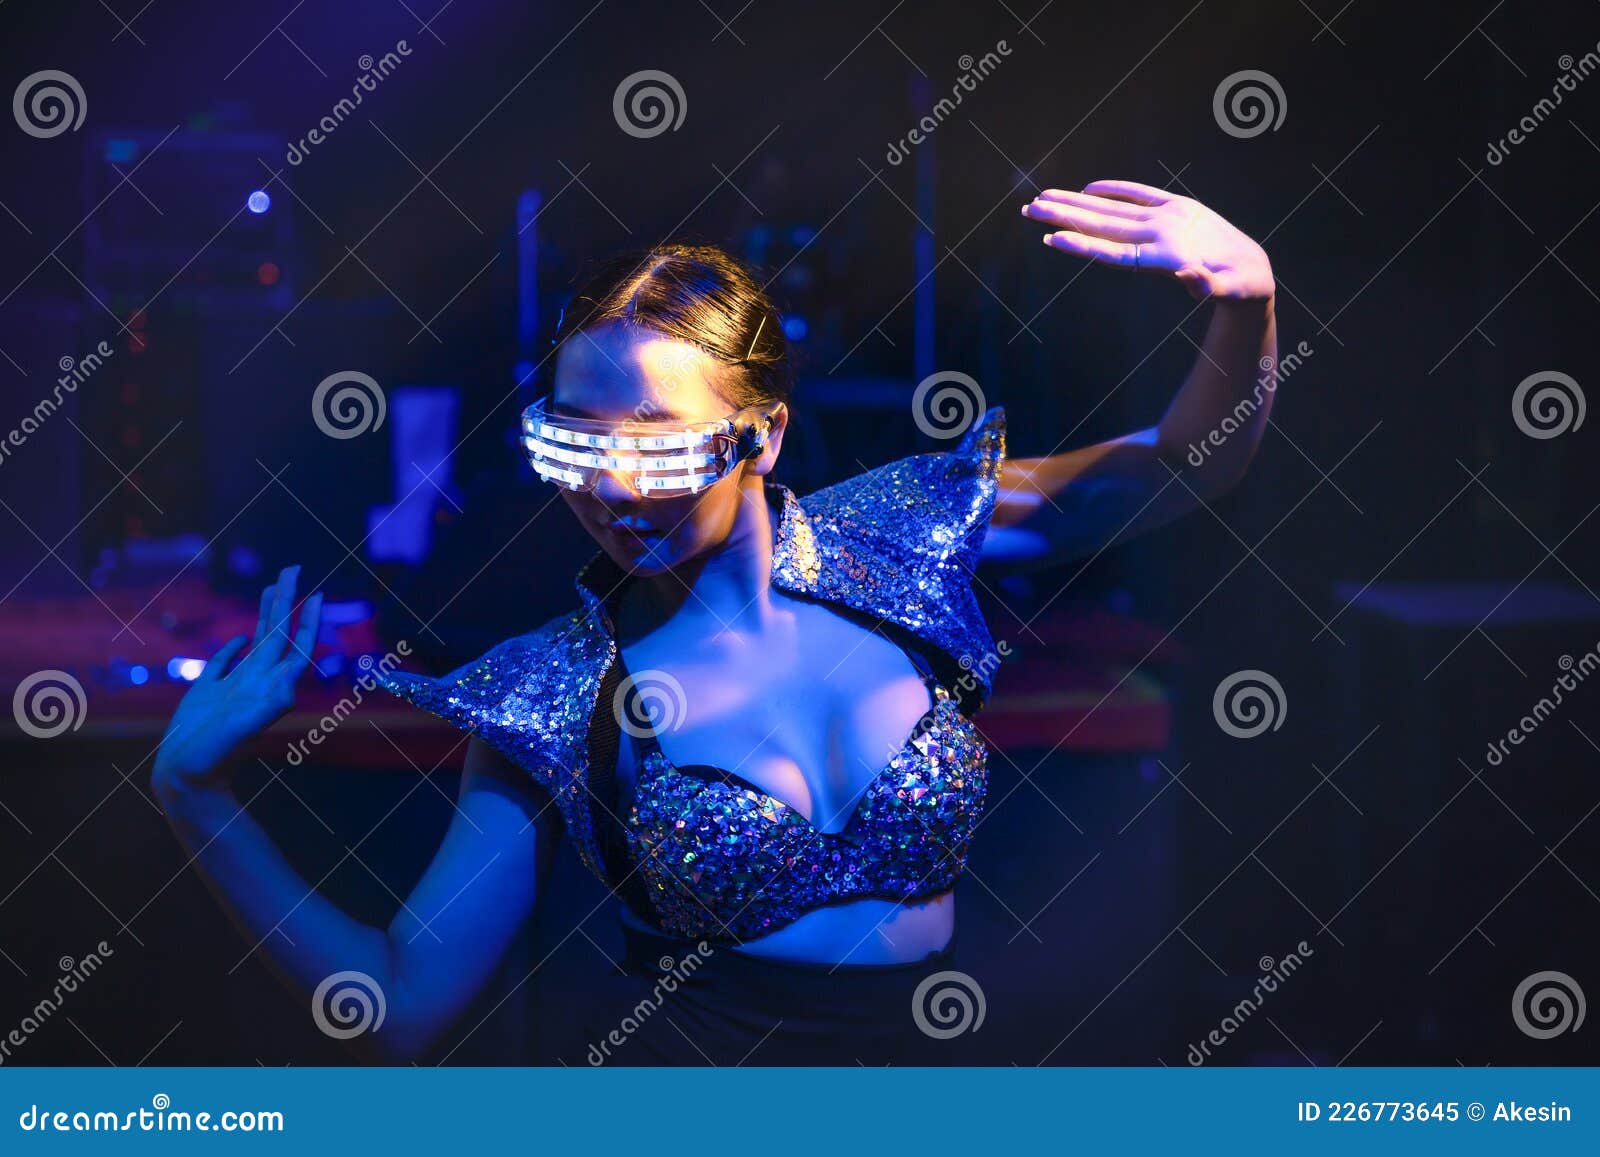 Dancersshowing Techno Dance Performance In Disco And Nightclub Stock Image Image Of Light